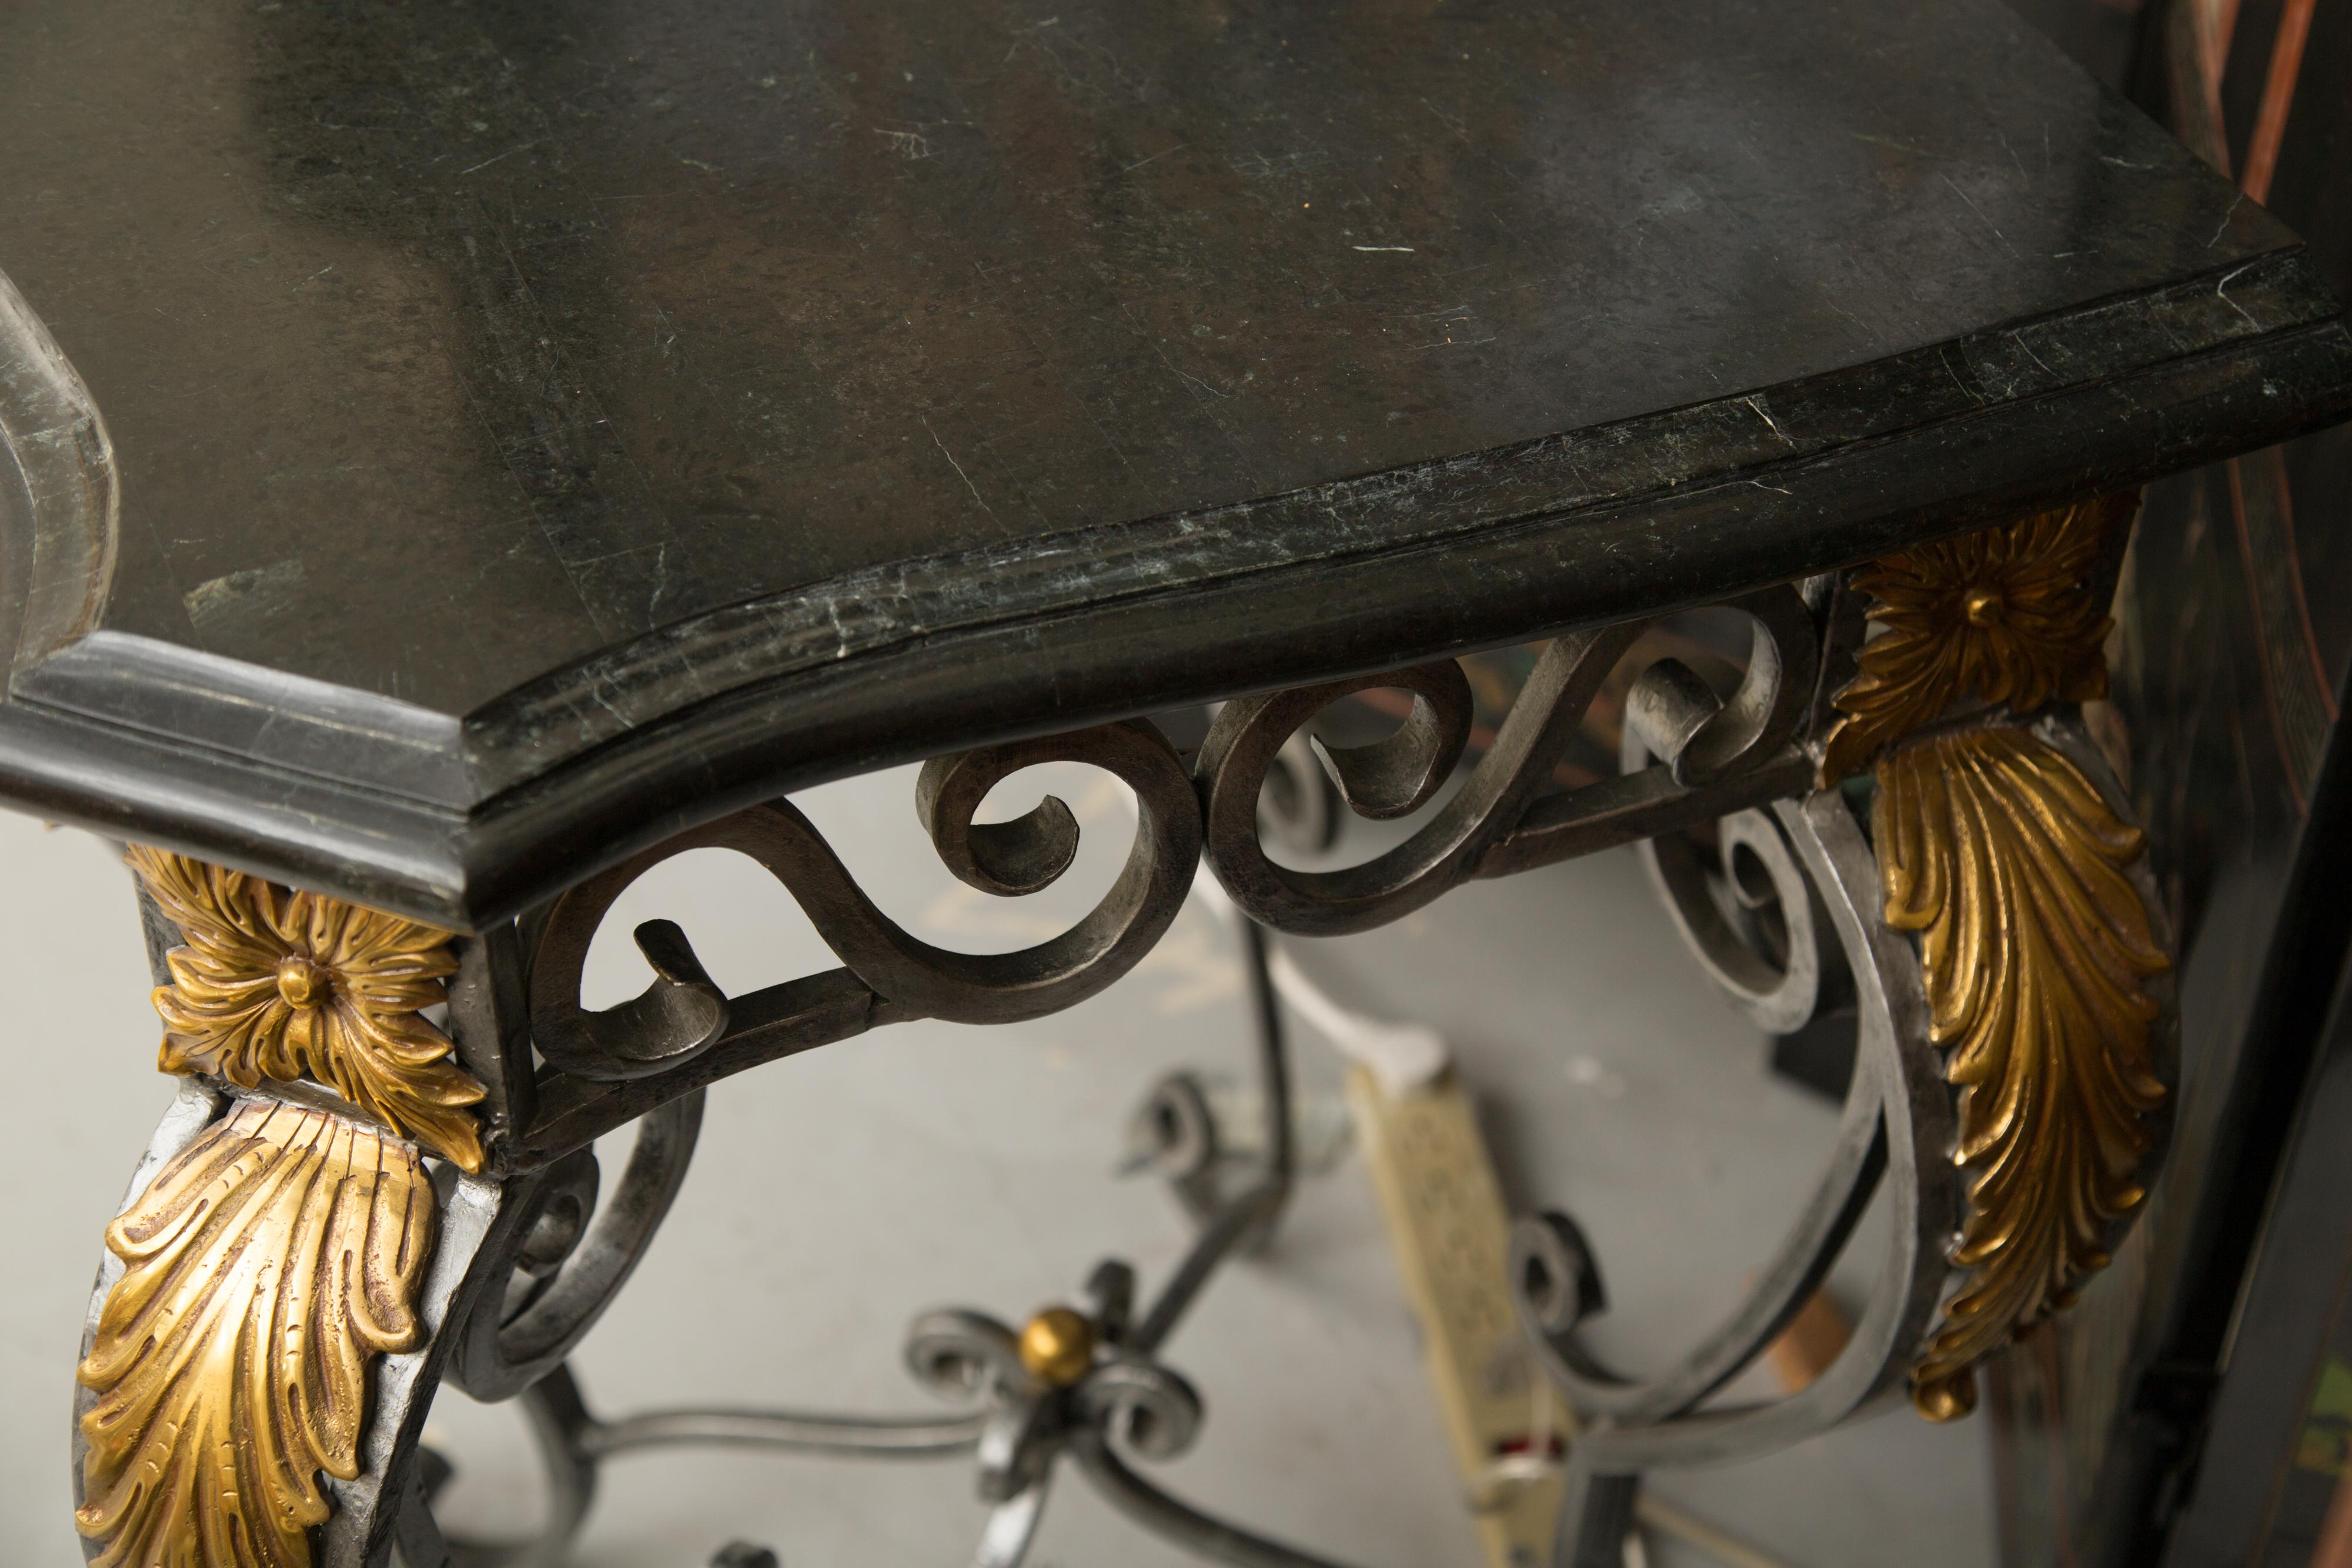 This is an impressive iron serpentine shaped console table with a scrolled design and decorated with gilt mounted acanthus leaf decoration. The table has an elaborate form of scrolls and curls which offers a sophisticate element for ones interior.